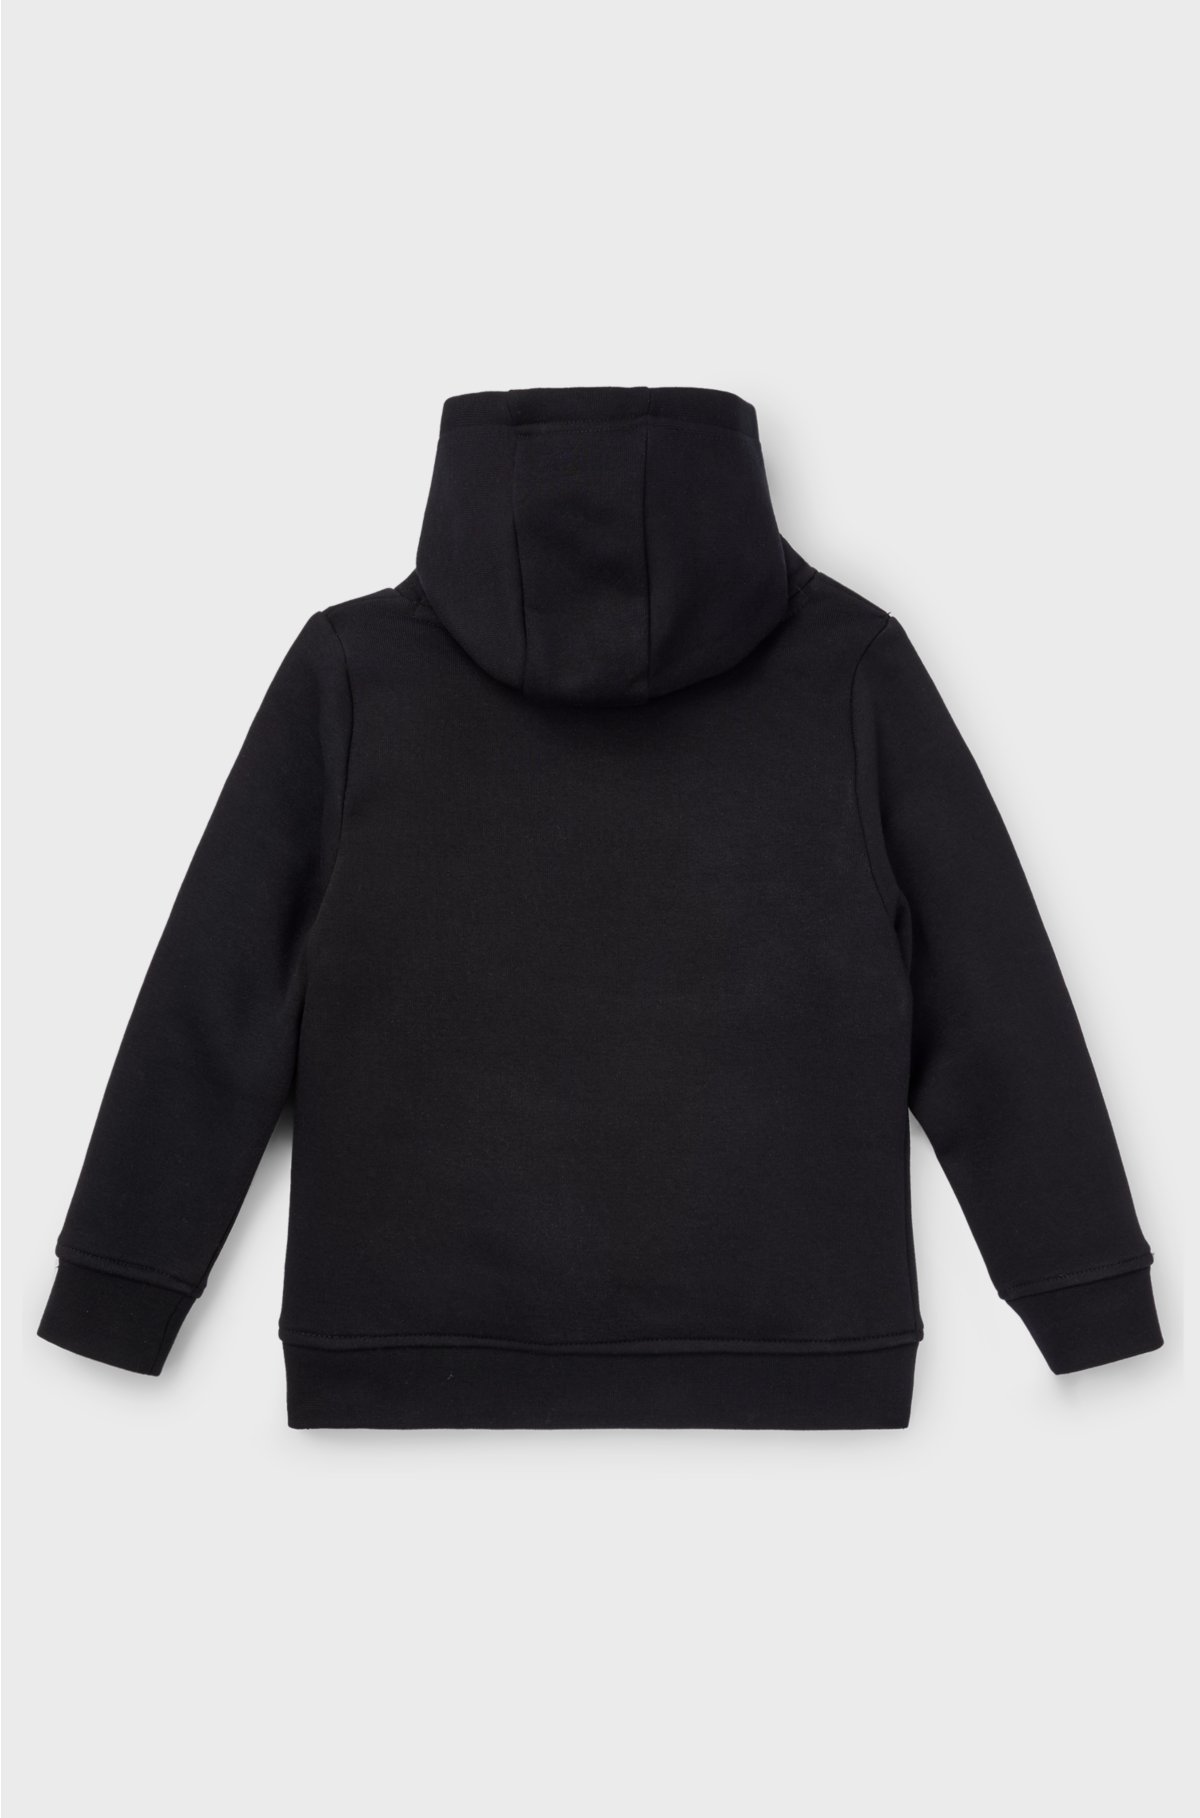 Kids' cotton-blend hoodie with contrast logo, Black